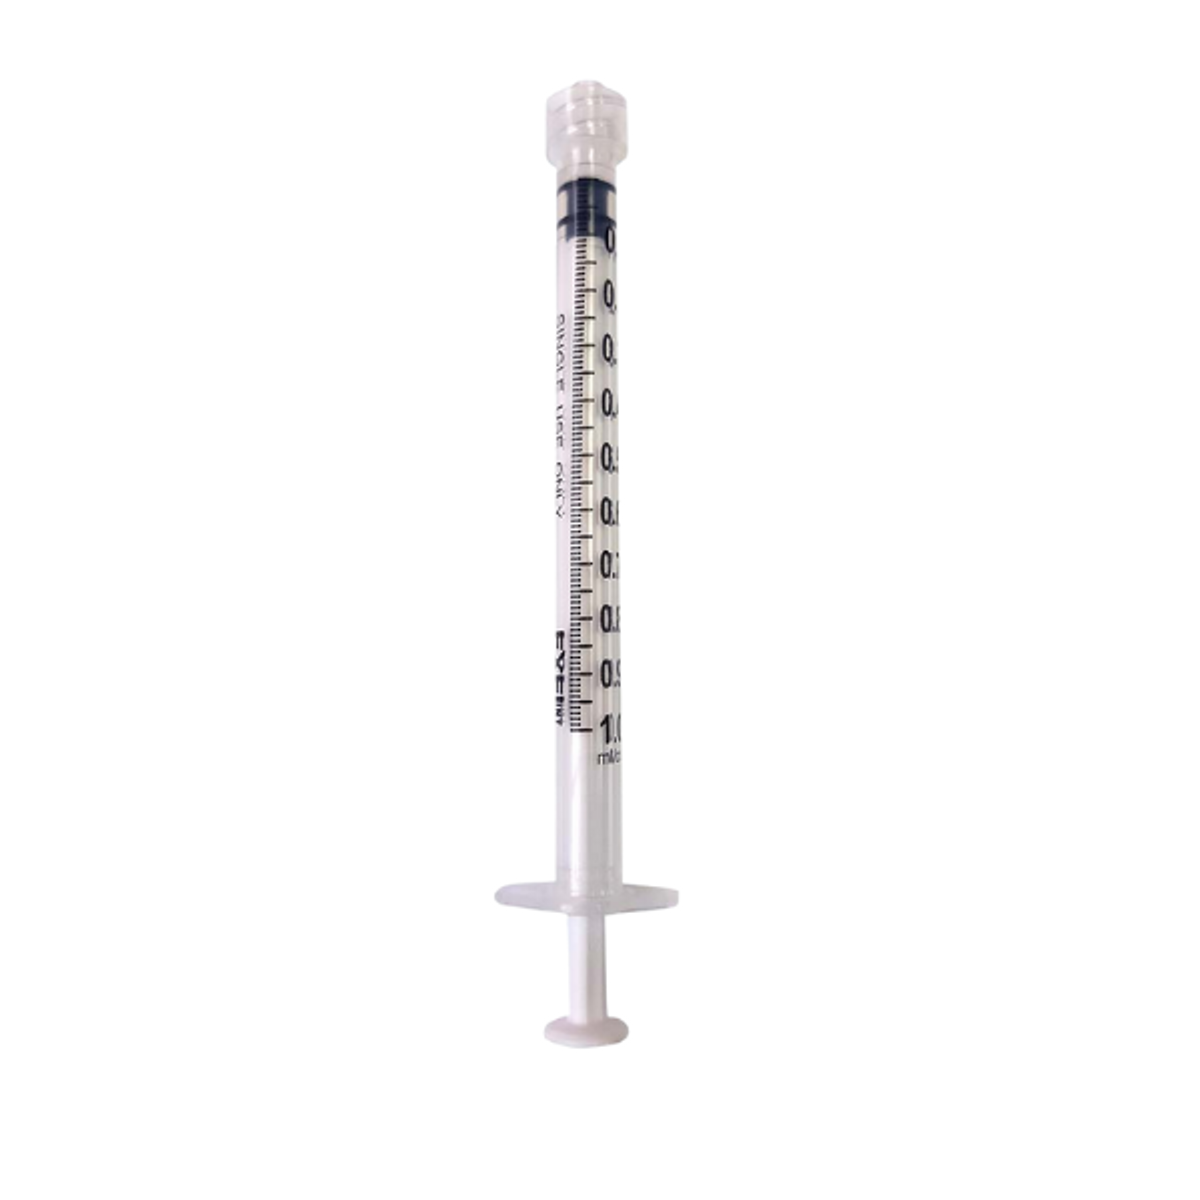 Exel Tuberculin Syringes with Luer Lock